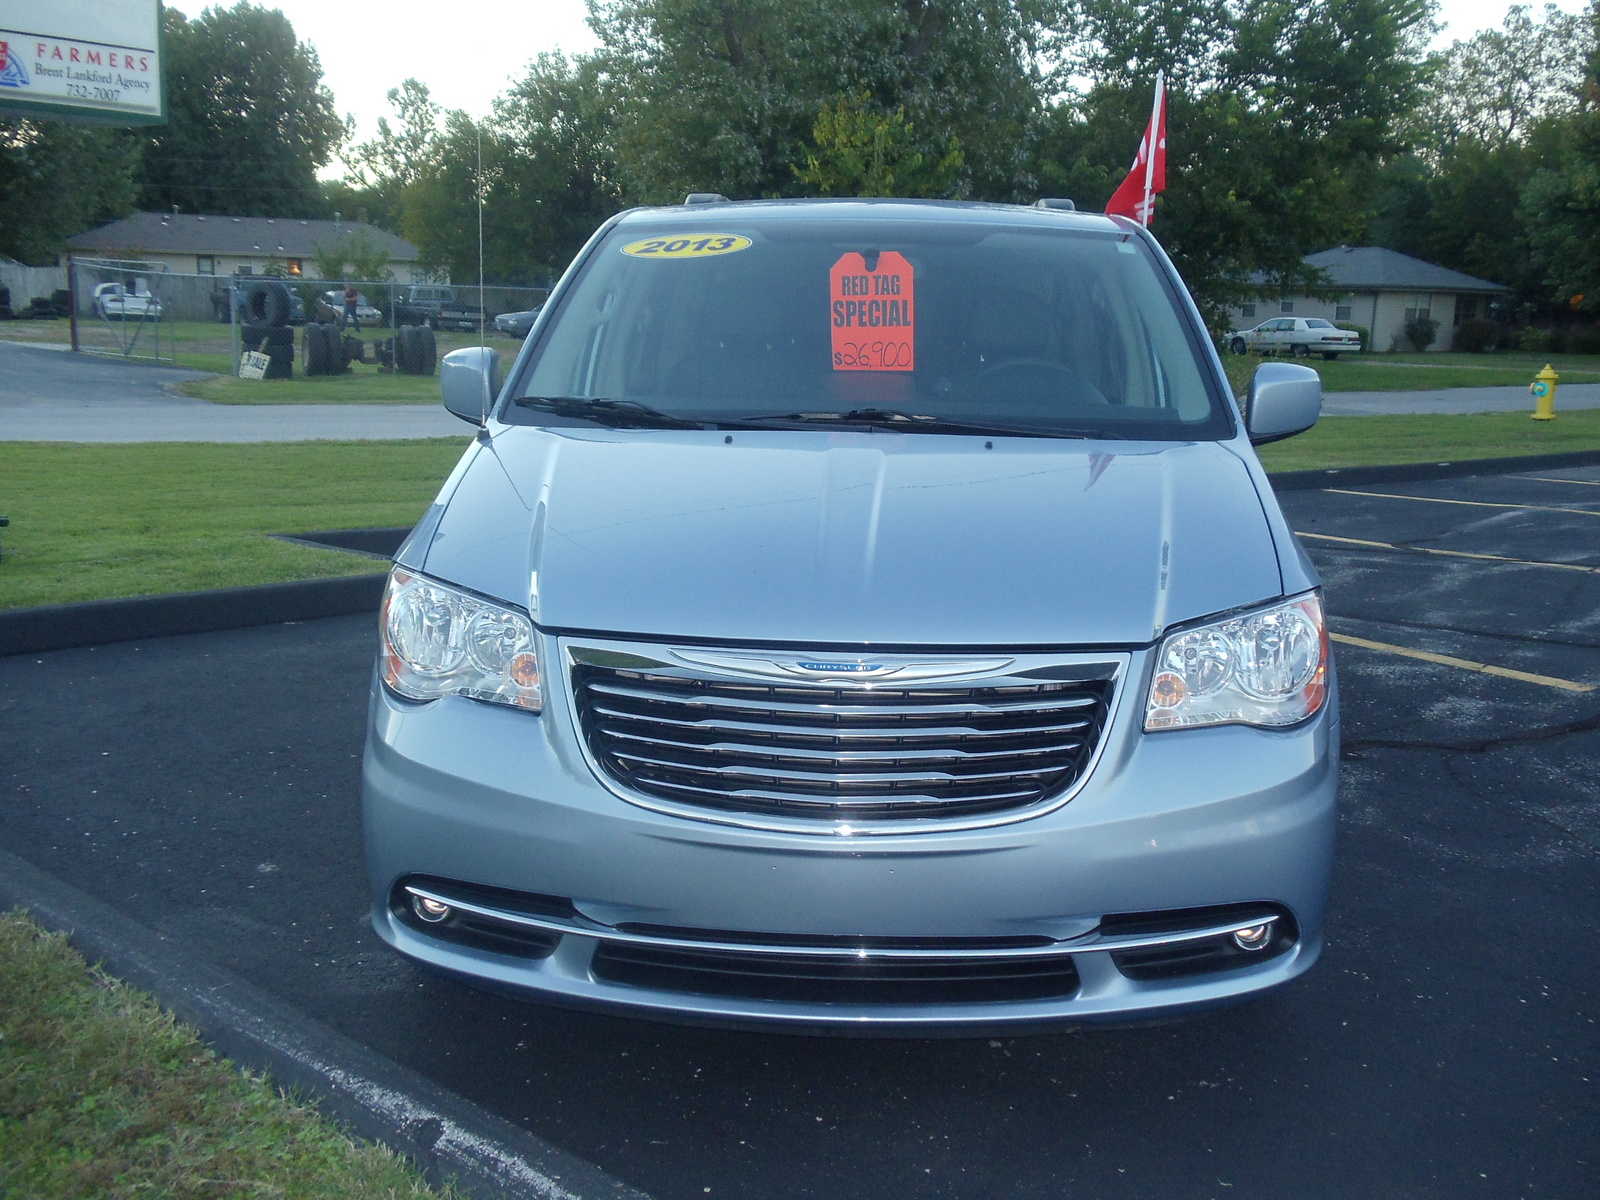 2008 Chrysler town and country touring recalls #2